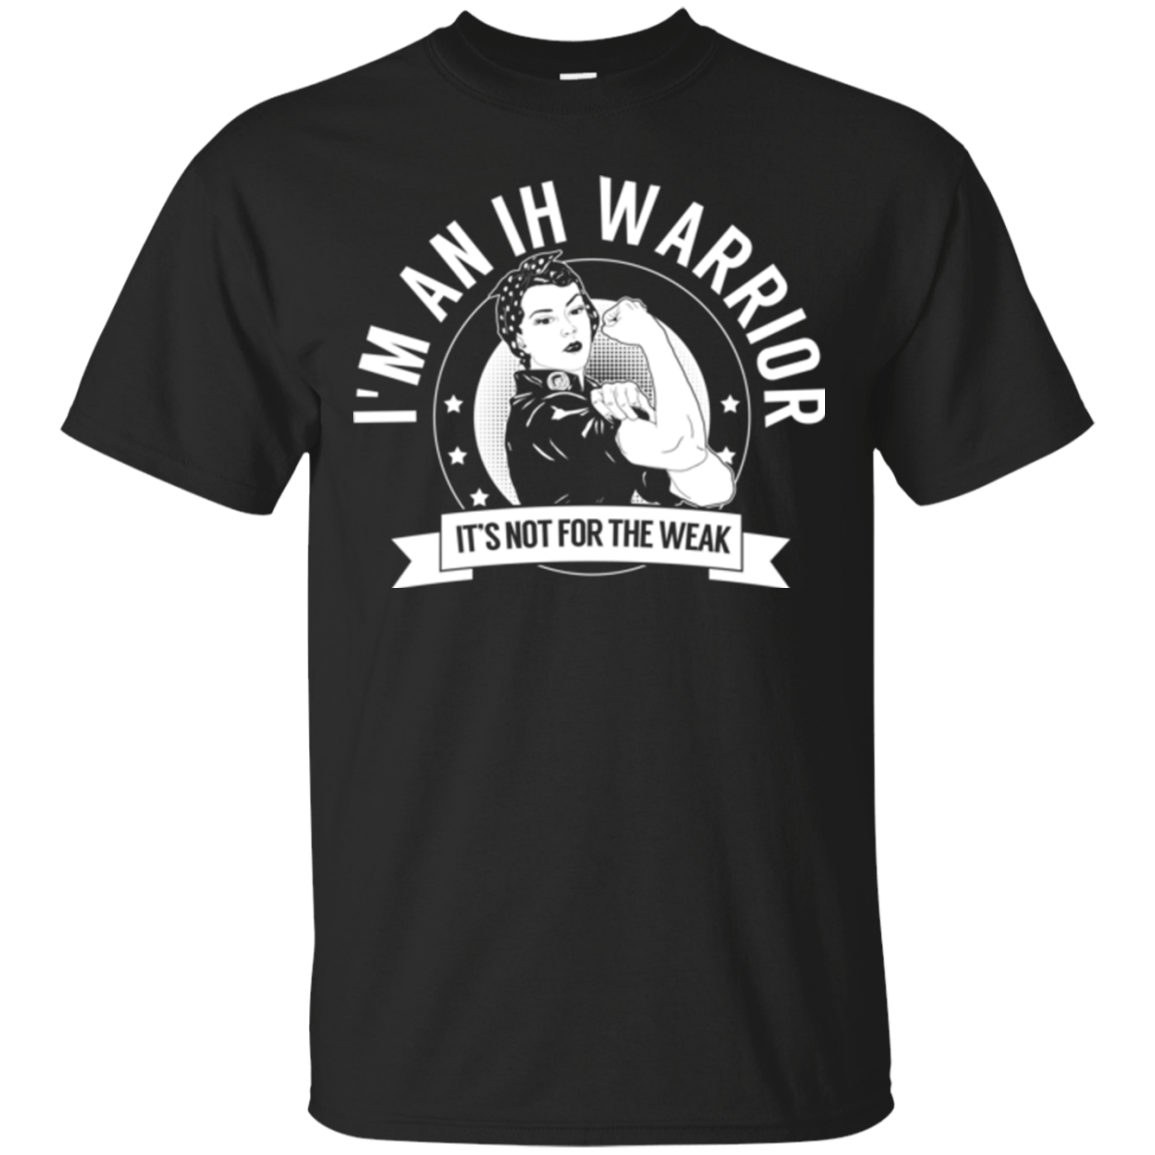 Idiopathic Hypersomnia - IH Warrior Not For The Weak Unisex Shirt - The Unchargeables